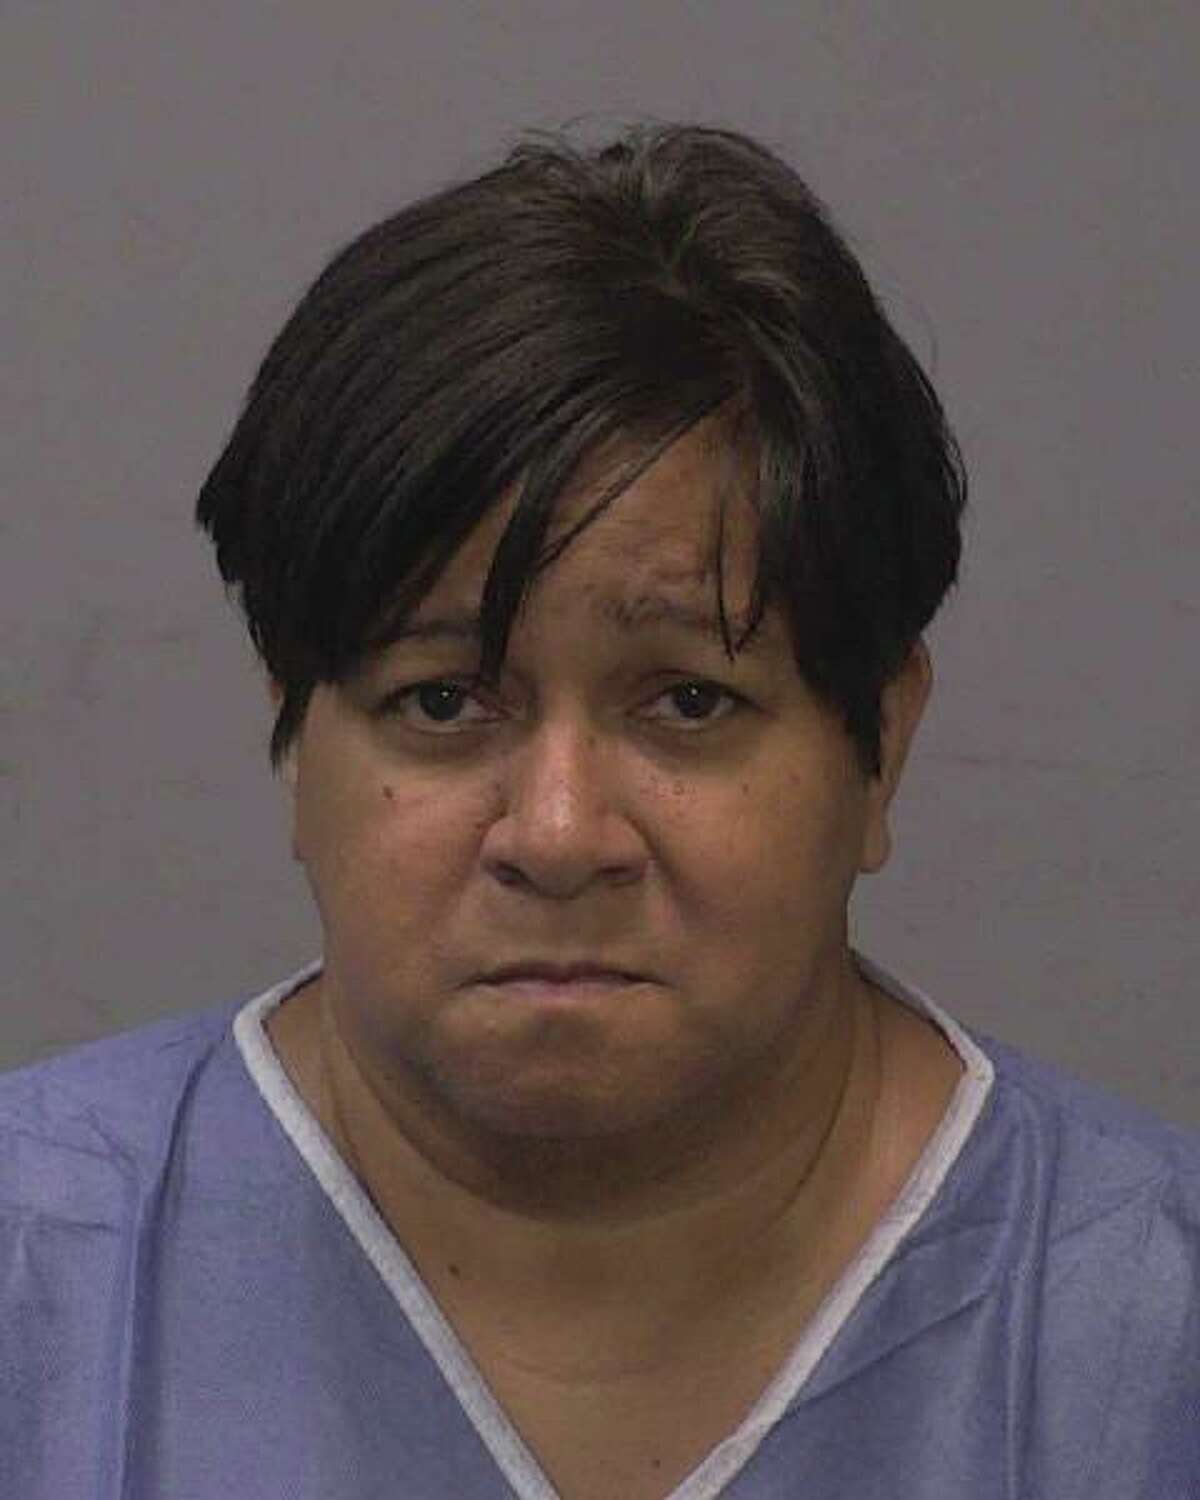 Judy Gomez, 55, of East Haven, is accused of driving the car that fatally struck 18-year-old Christopher Franco, of New Haven on Friday, July 26, 2019.